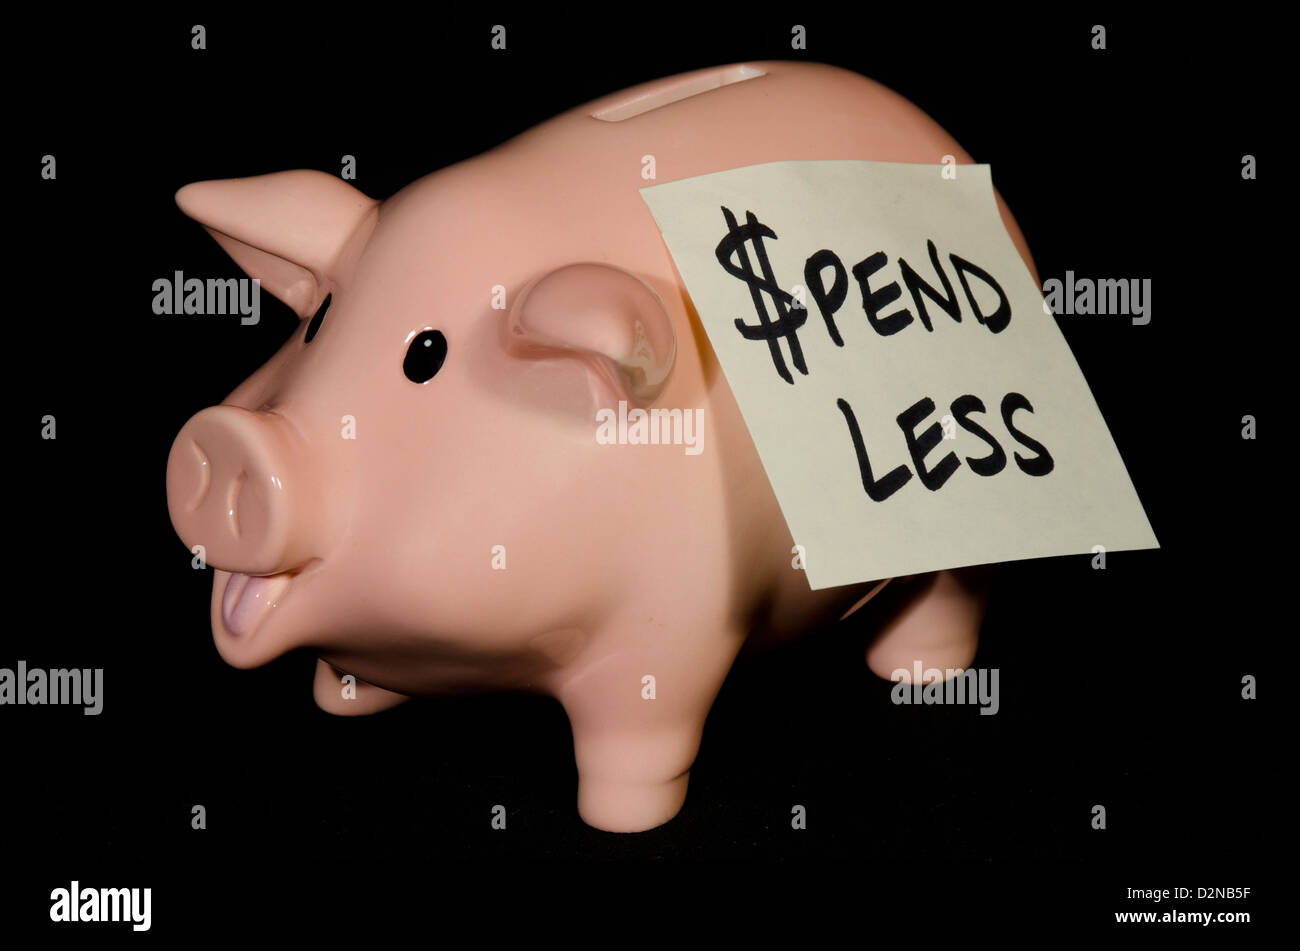 This empty little piggy bank has a note on his side to remind him to spend less money and try to save it. Stock Photo